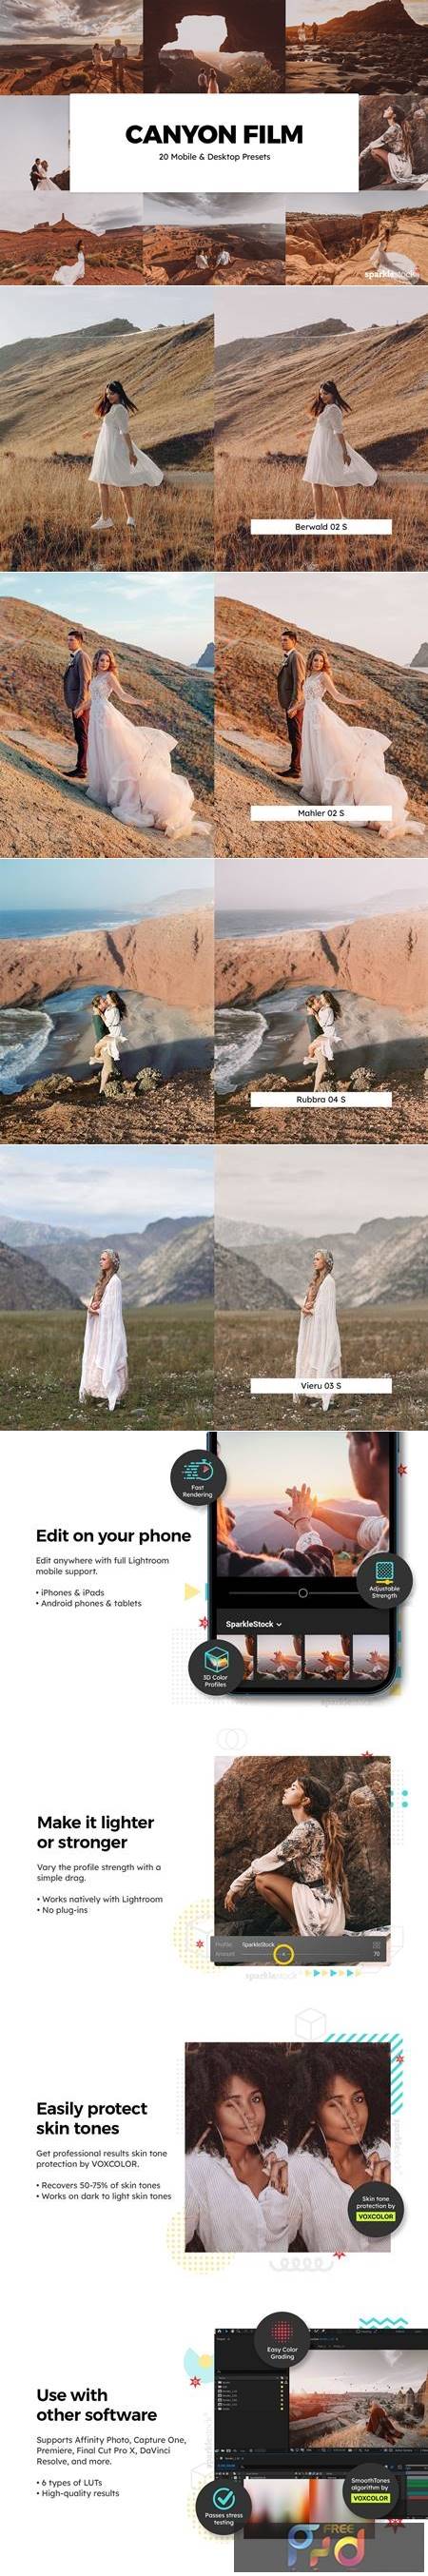 20 Canyon Film Lightroom Presets & LUTs THPKX7H 1